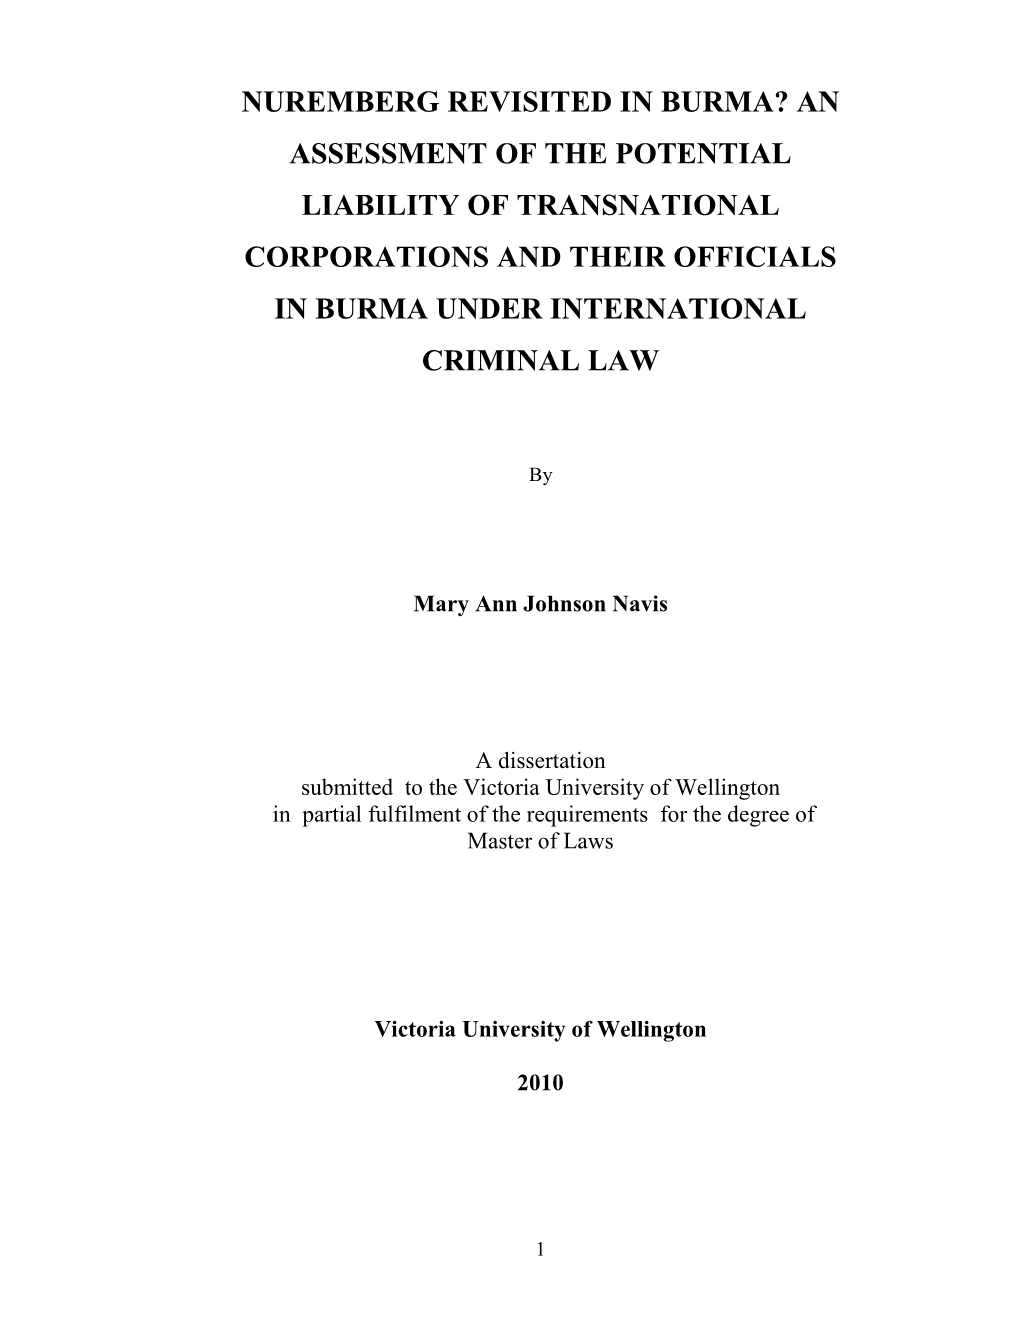 Nuremberg Revisited in Burma? an Assessment of the Potential Liability of Transnational Corporations and Their Officials in Burma Under International Criminal Law